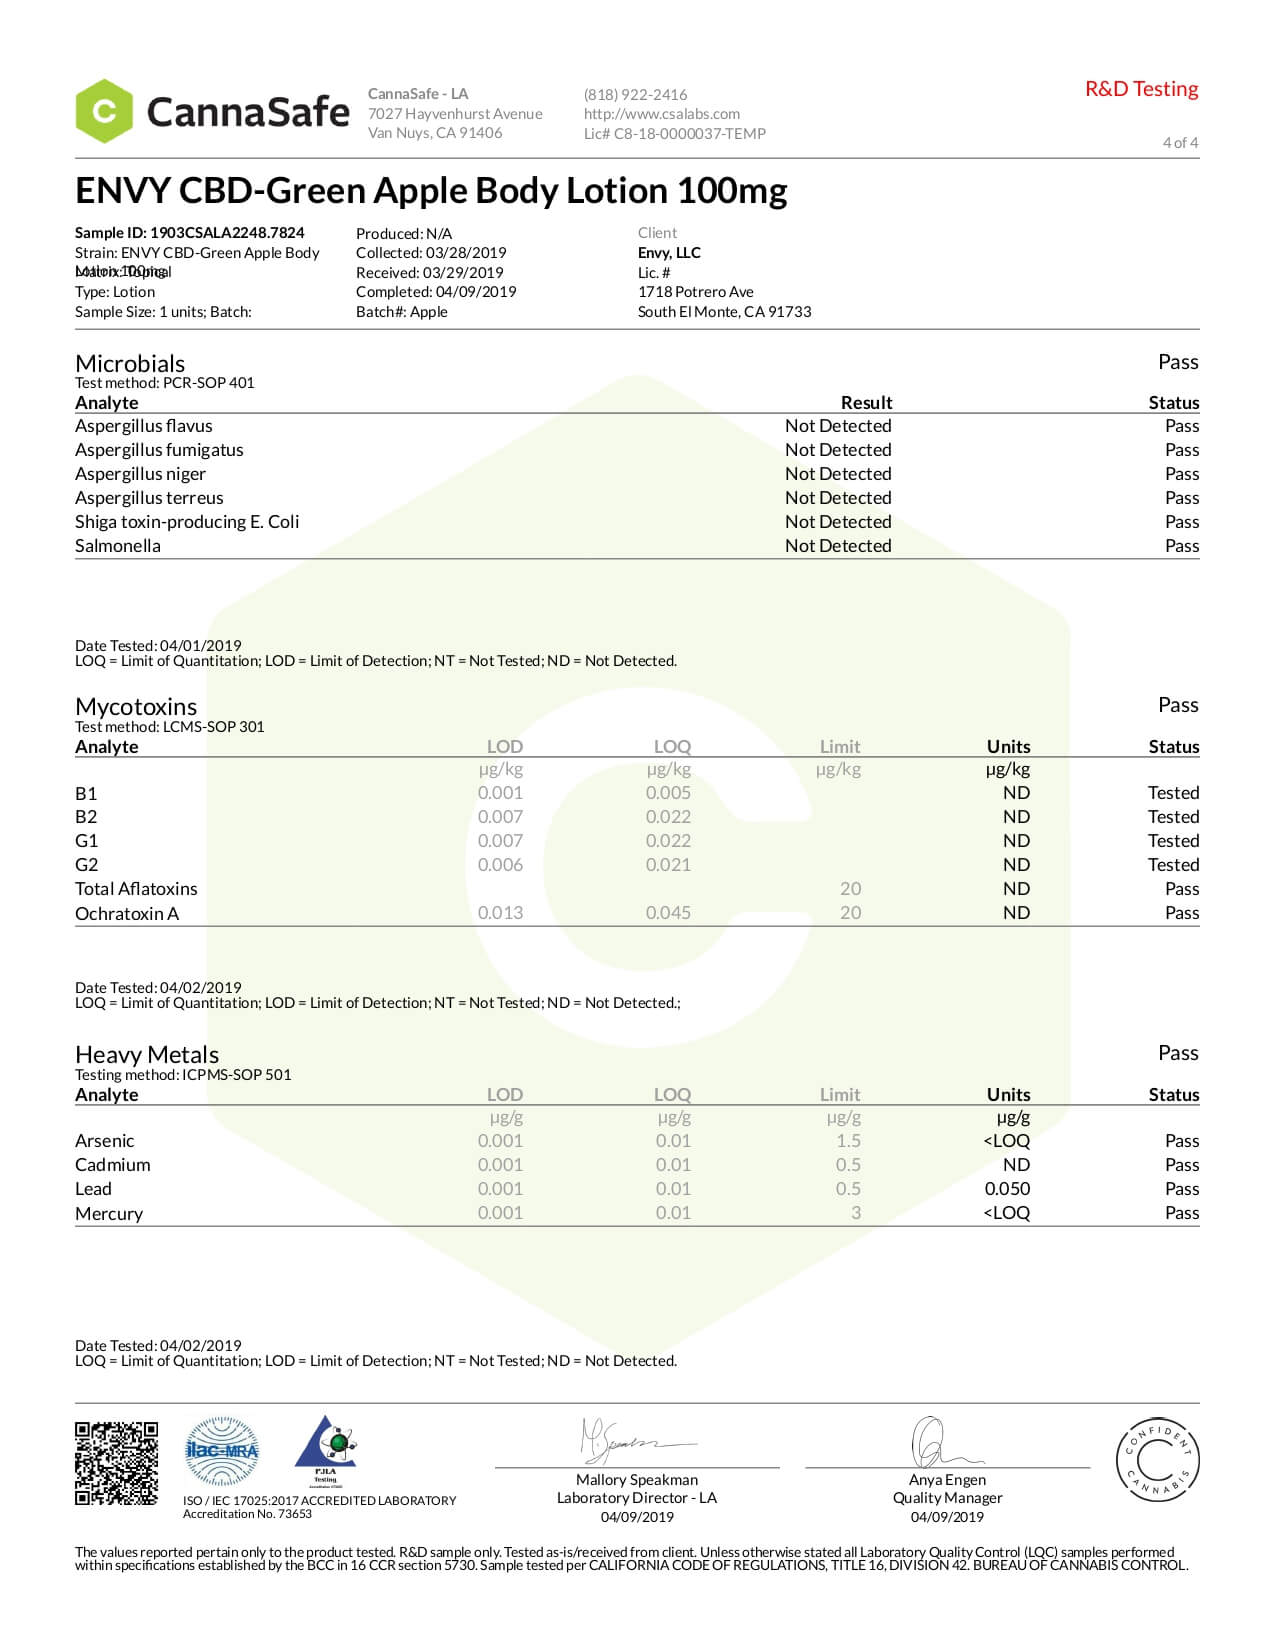 ENVY CBD Topical Green Apple Body Lotion Lab Report